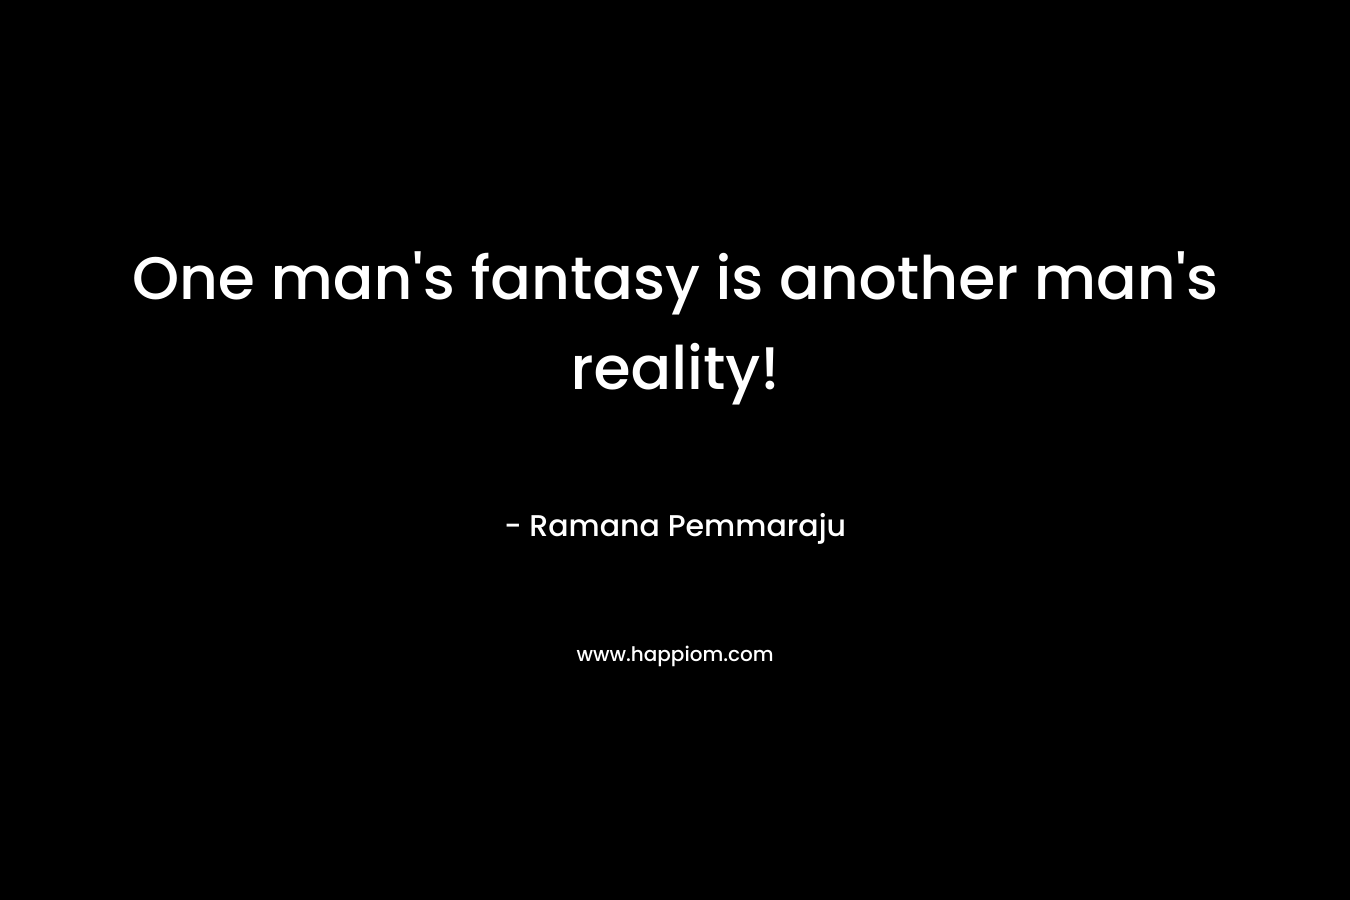 One man's fantasy is another man's reality!